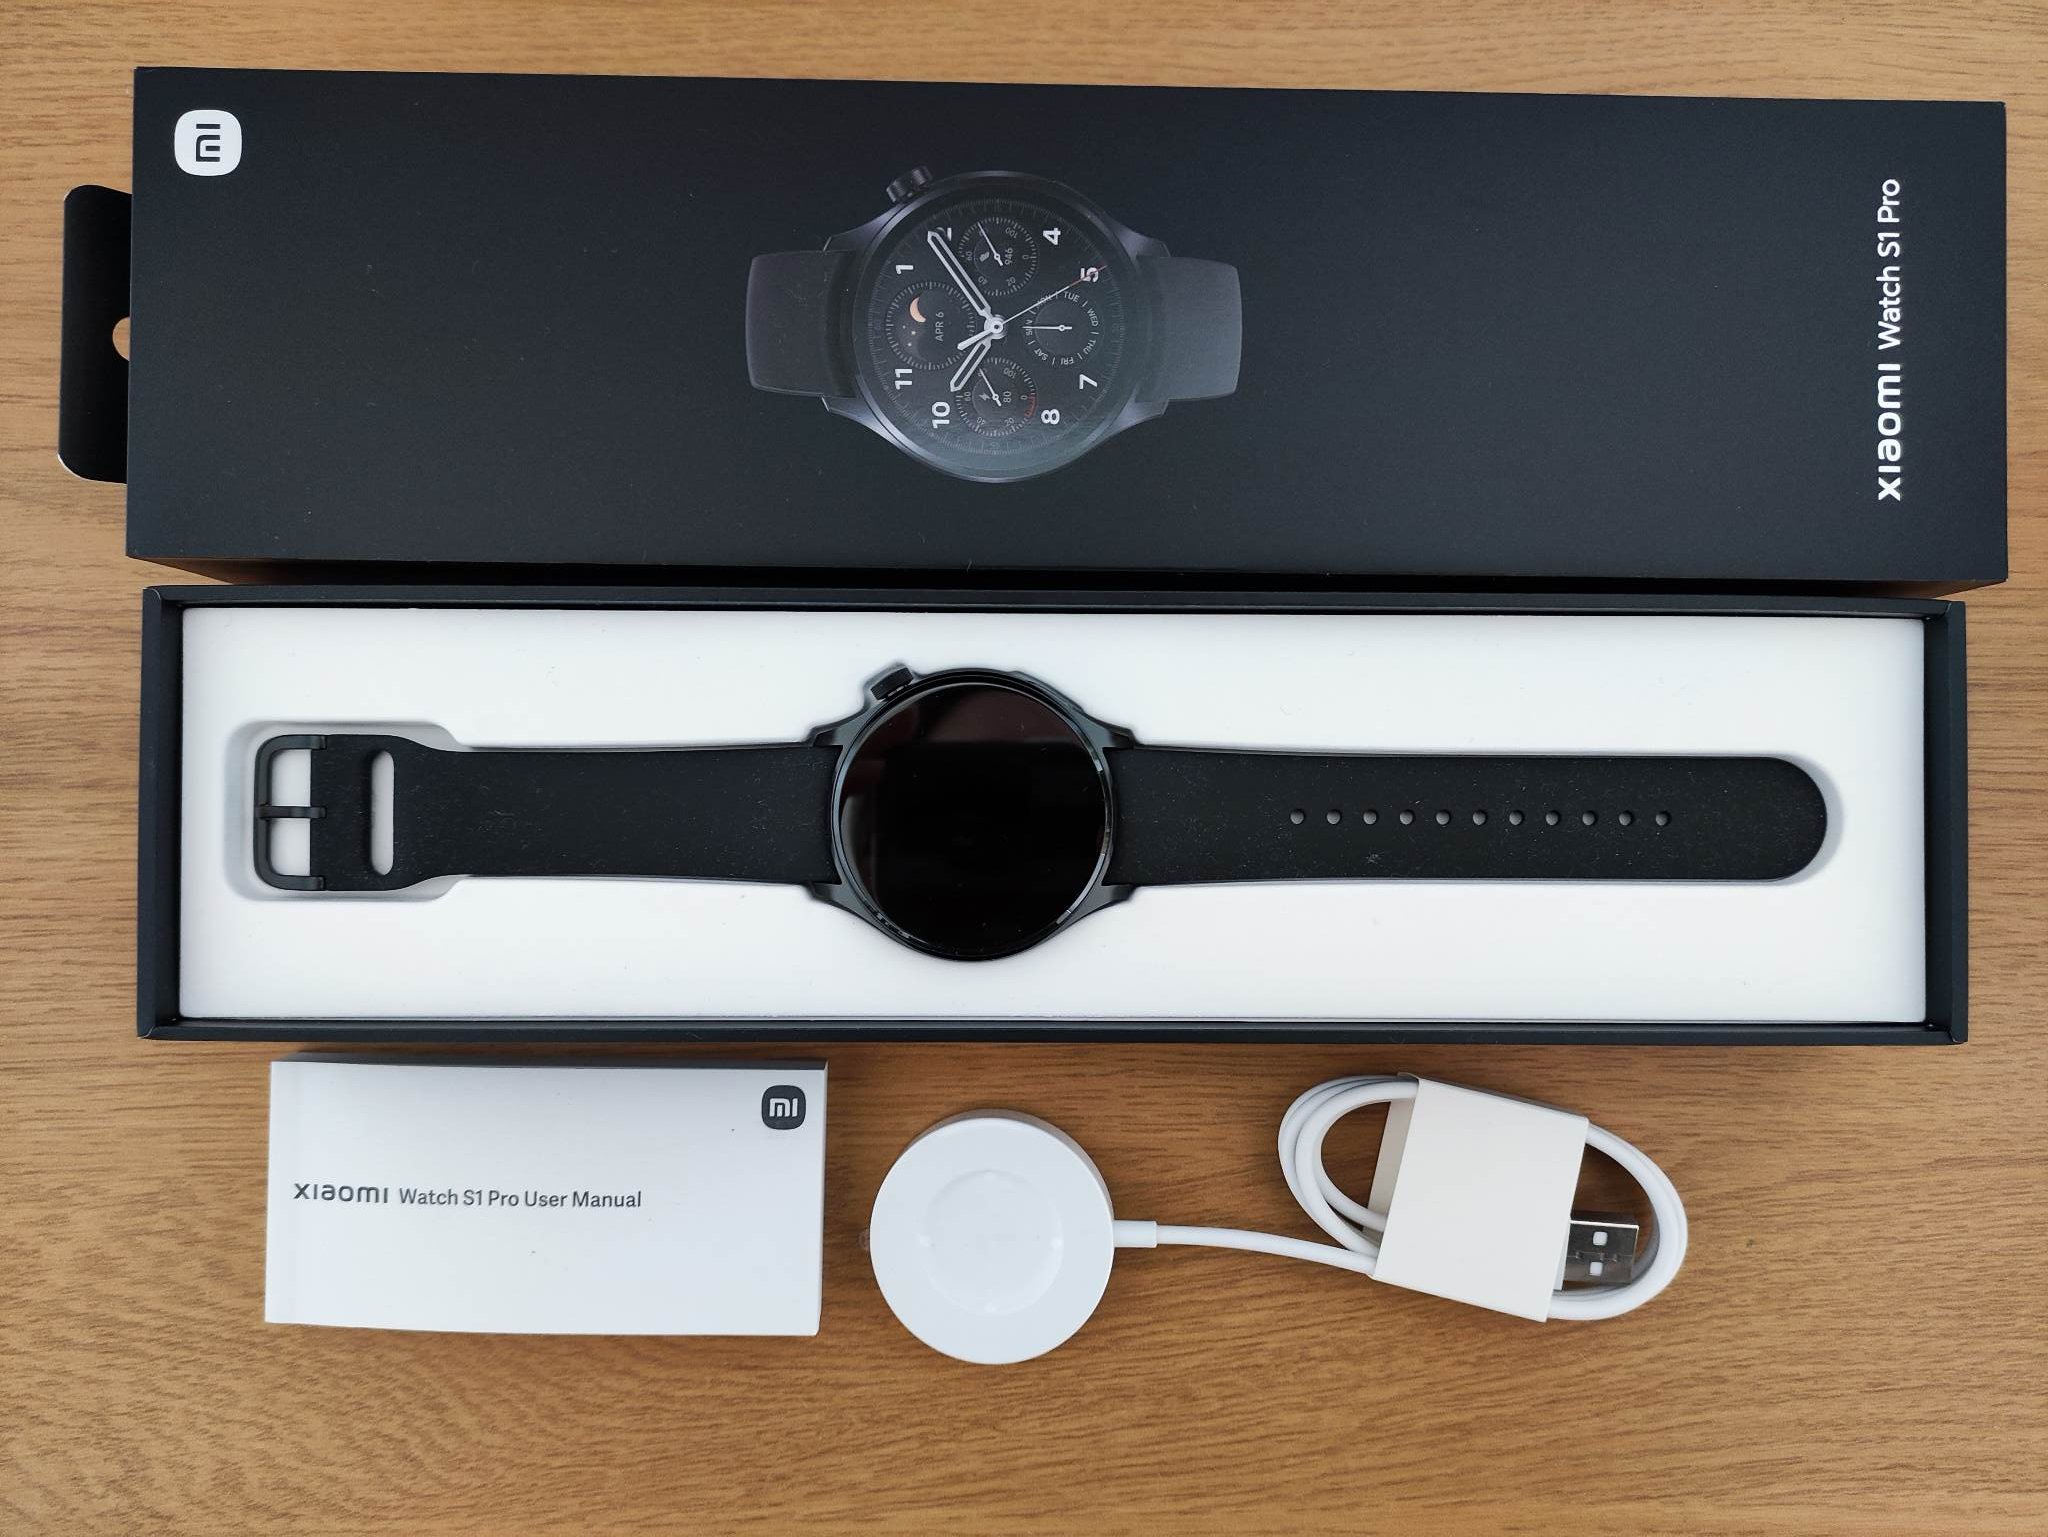 The Xiaomi Watch S1 Pro is revealed as both a stylish and